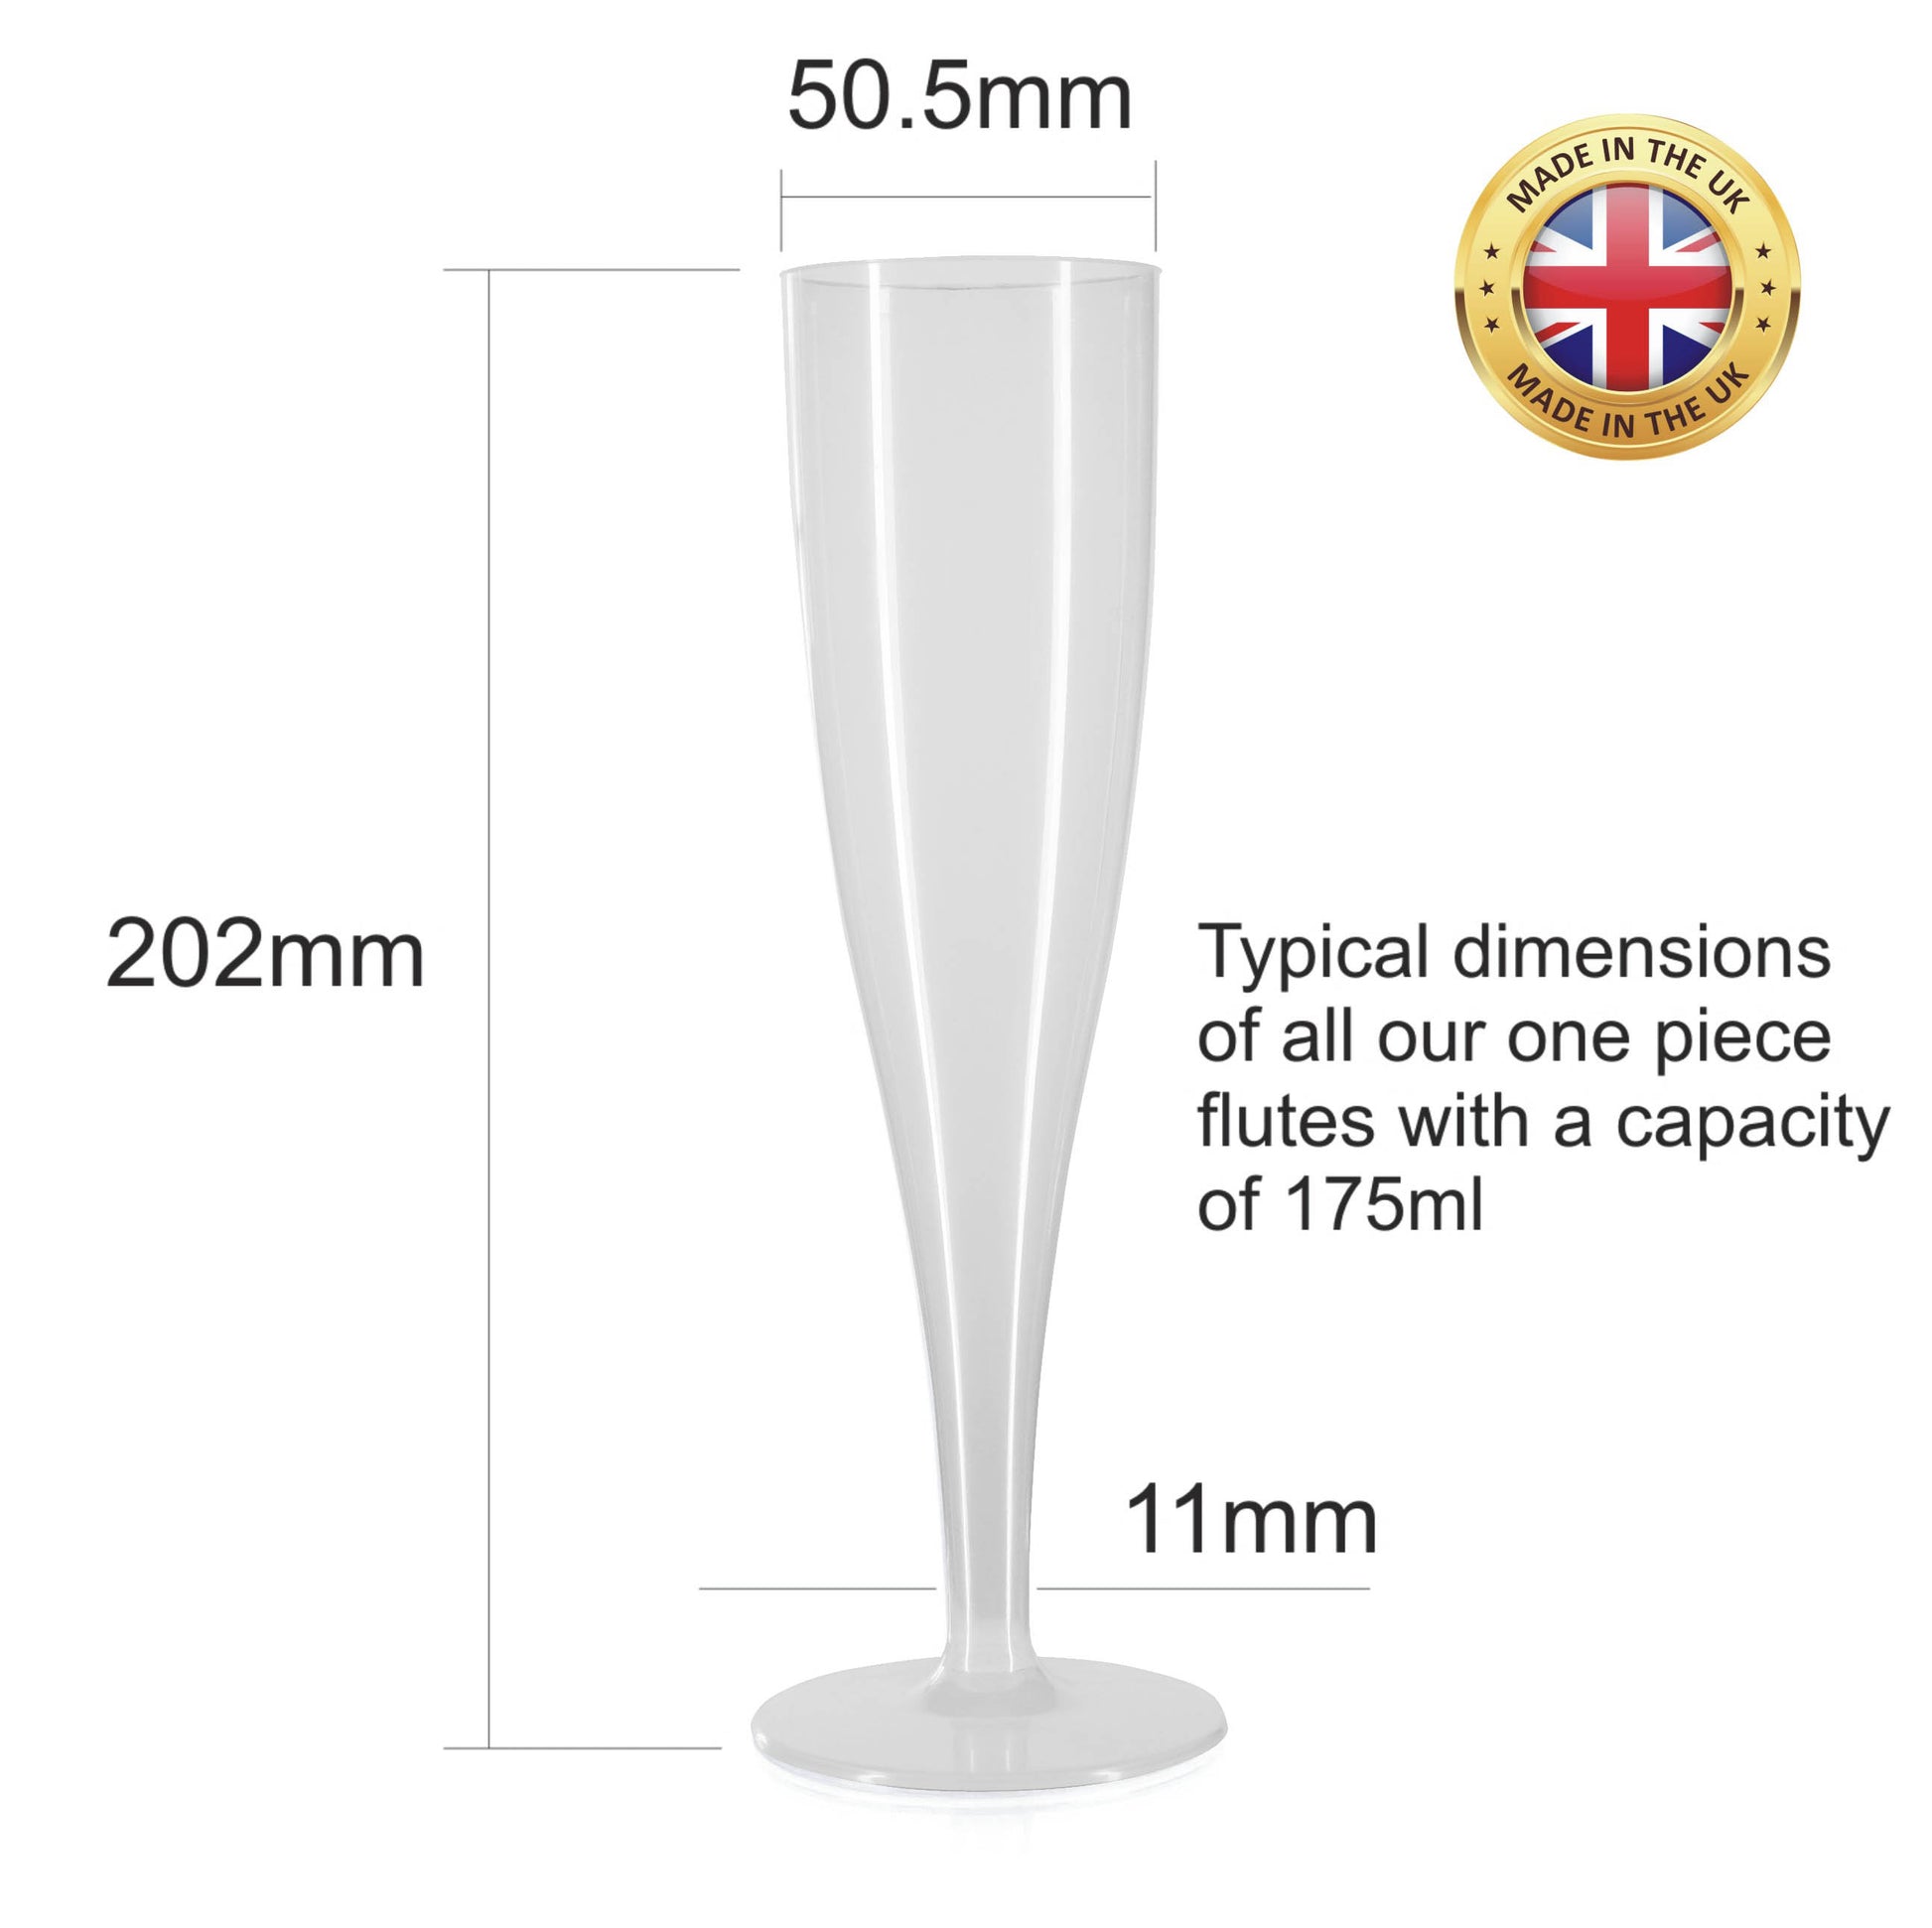 50 x White Prosecco Flutes – Biodegradable Material - Disposable – Glossy Bright White Prosecco Glass - One Piece – Pack of 50-5056020182986-EY-PP-015-Product Pro-Champagne Flute, Champagne Glasses, Flutes, Prosecco Flute, Prosecco Glasses, White Flutes